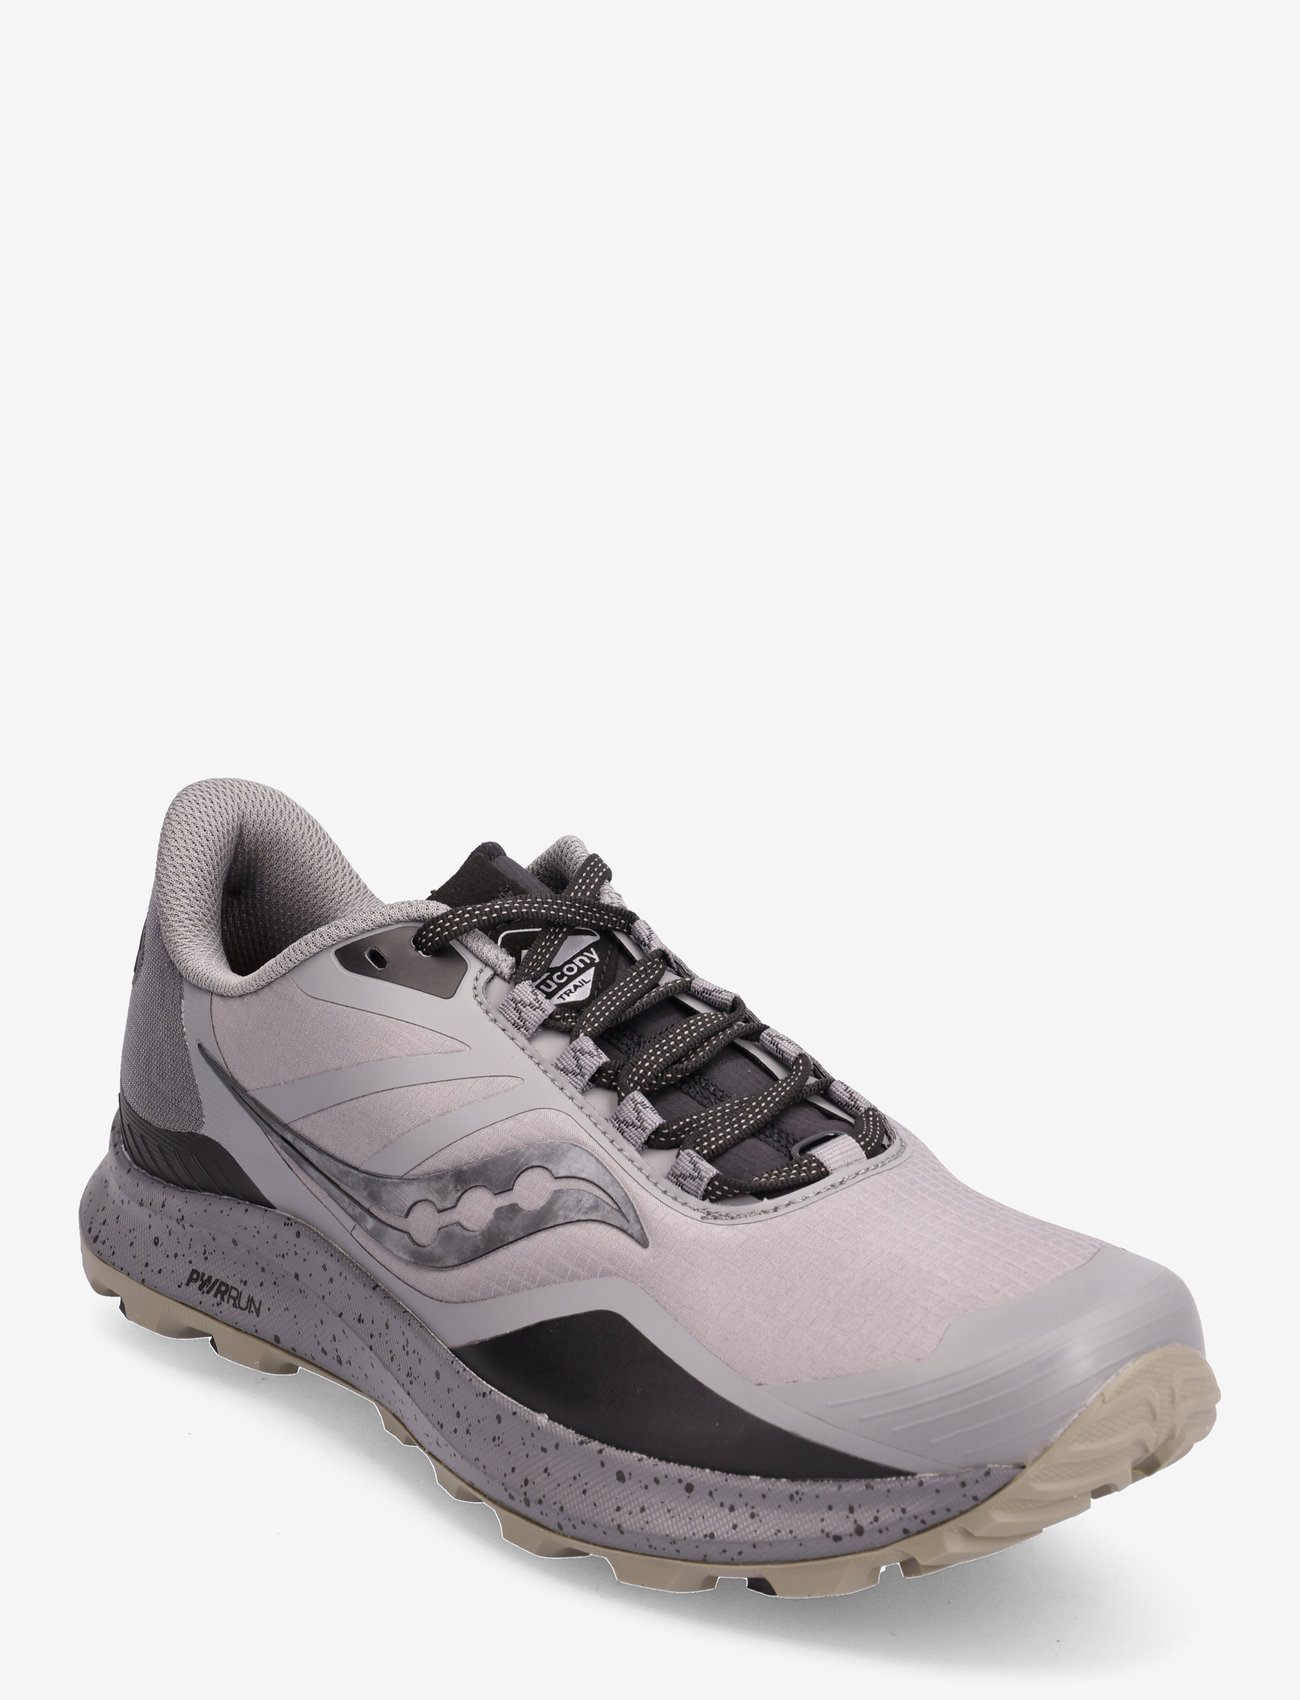 Saucony - PEREGRINE ICE+ 3 - running shoes - gravel/blk - 0